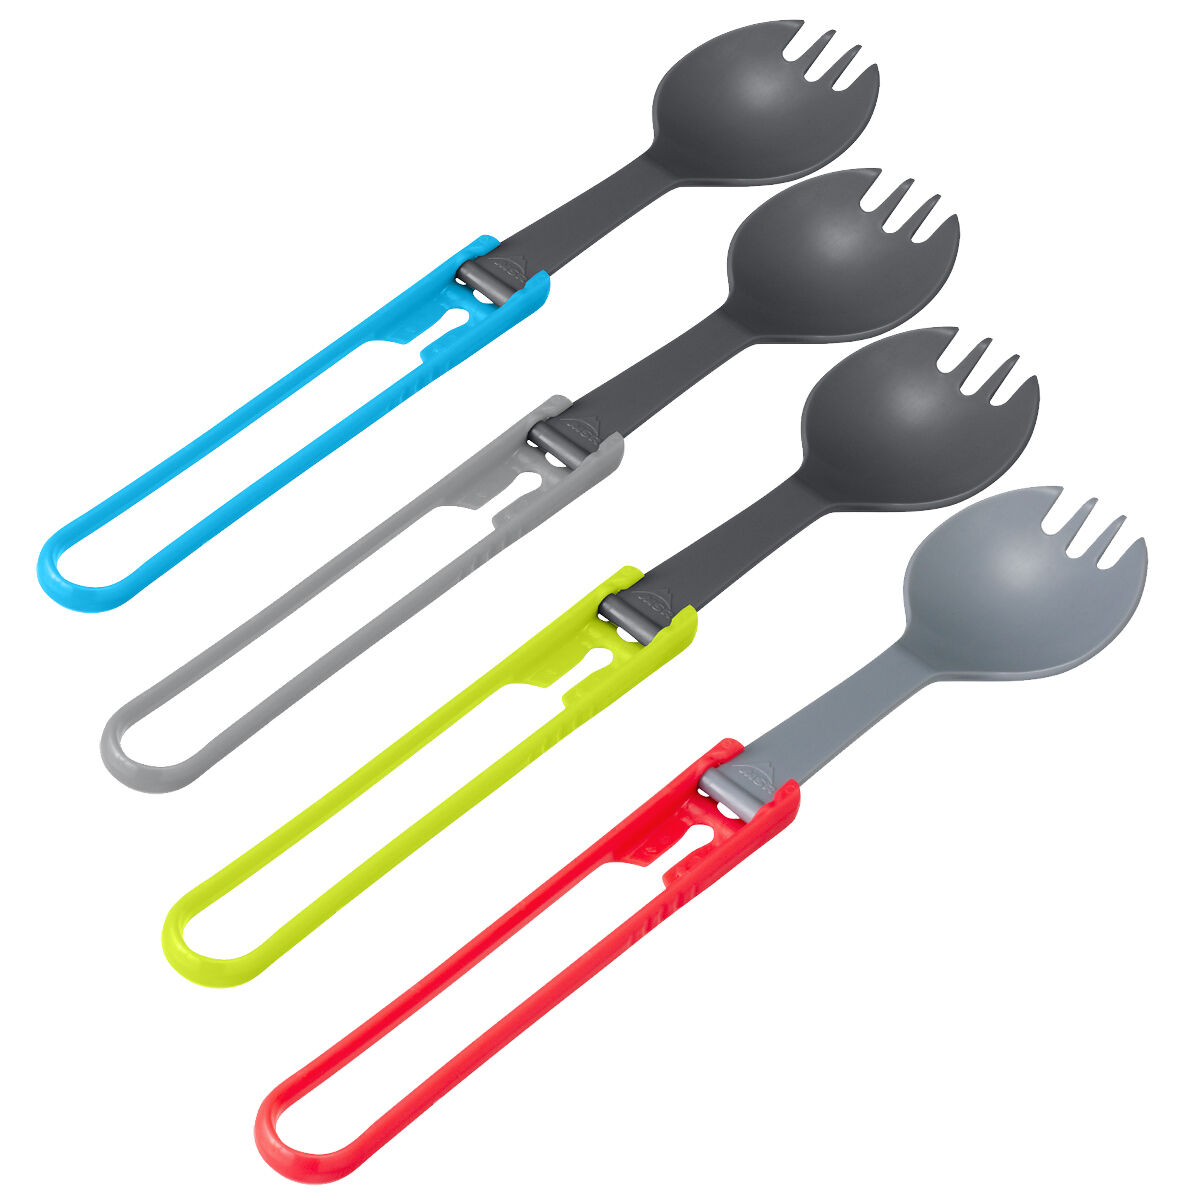 Outdoor Travel Silver XPT 3 in 1 Barbecue Tongs,Multifunctional Stainless Steel Camping BBQ Spoon Tong Spatula Utensil for Camping